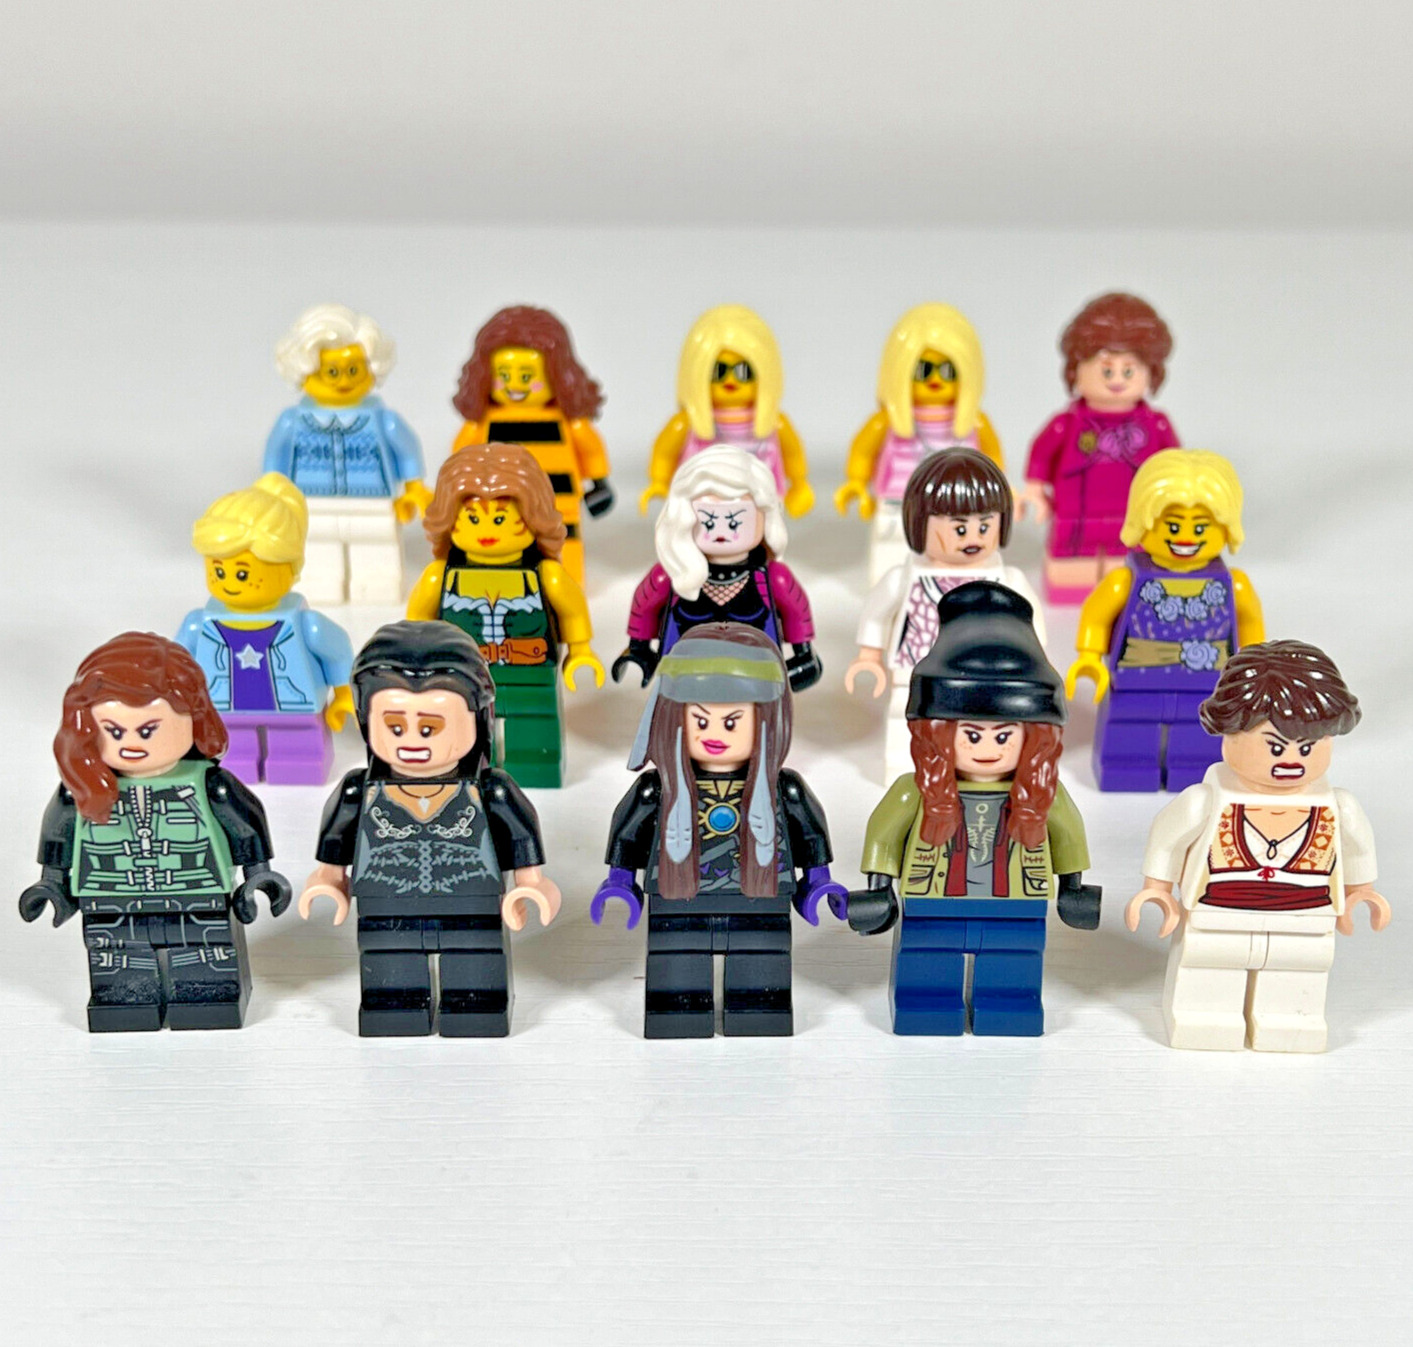 Authentic Lego Minifigures Misc Lot of 15 Female Figures - Girl Power Lot!